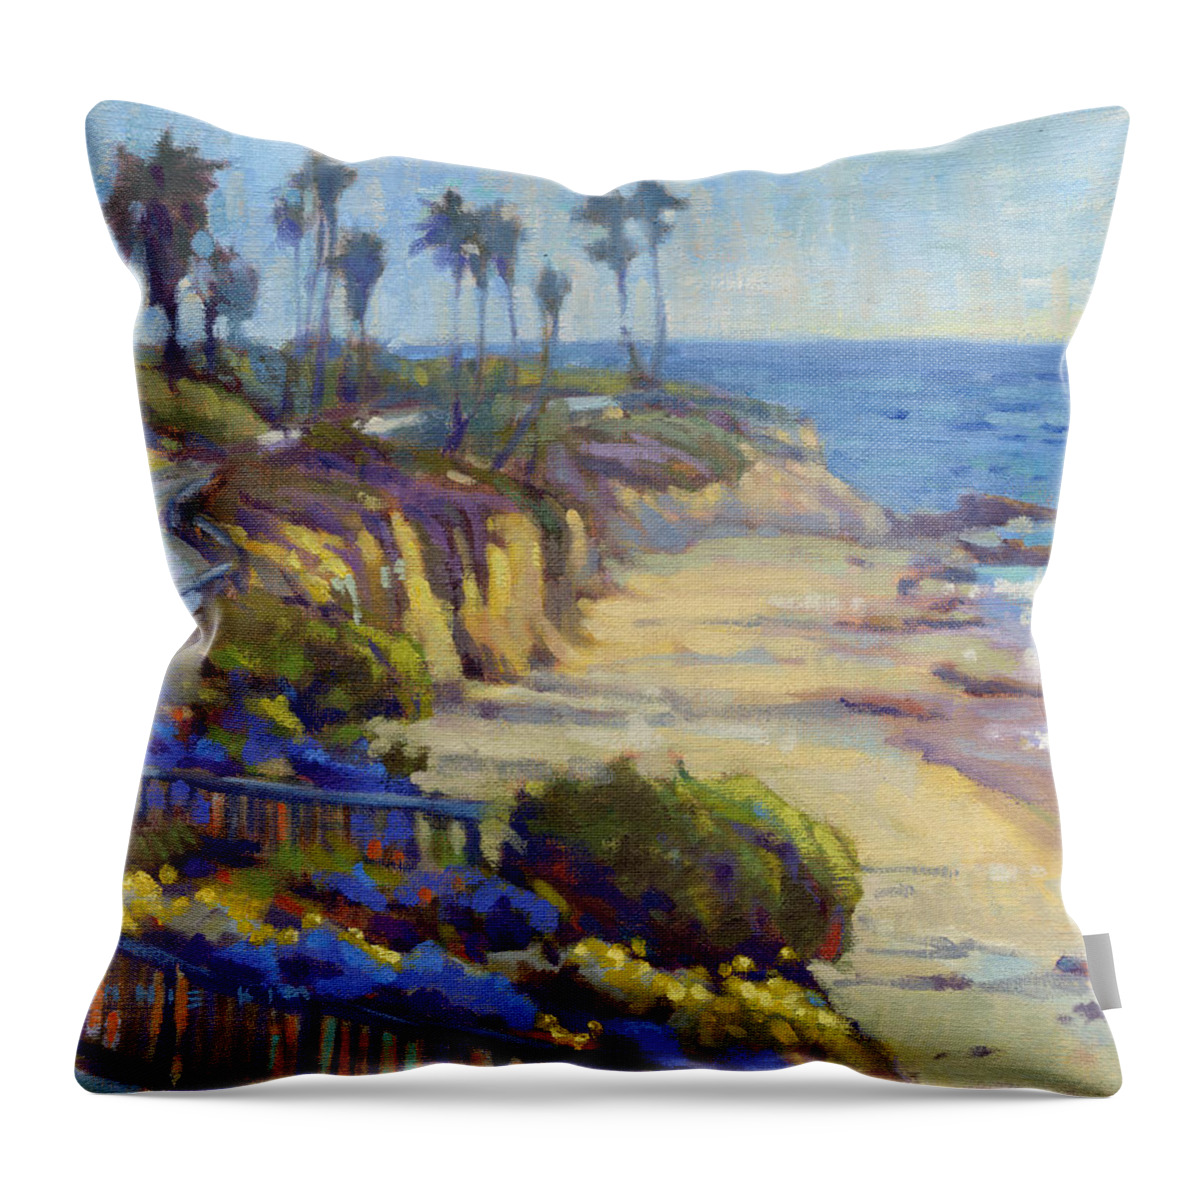 Picnic Throw Pillow featuring the painting Picnic Beach by Konnie Kim